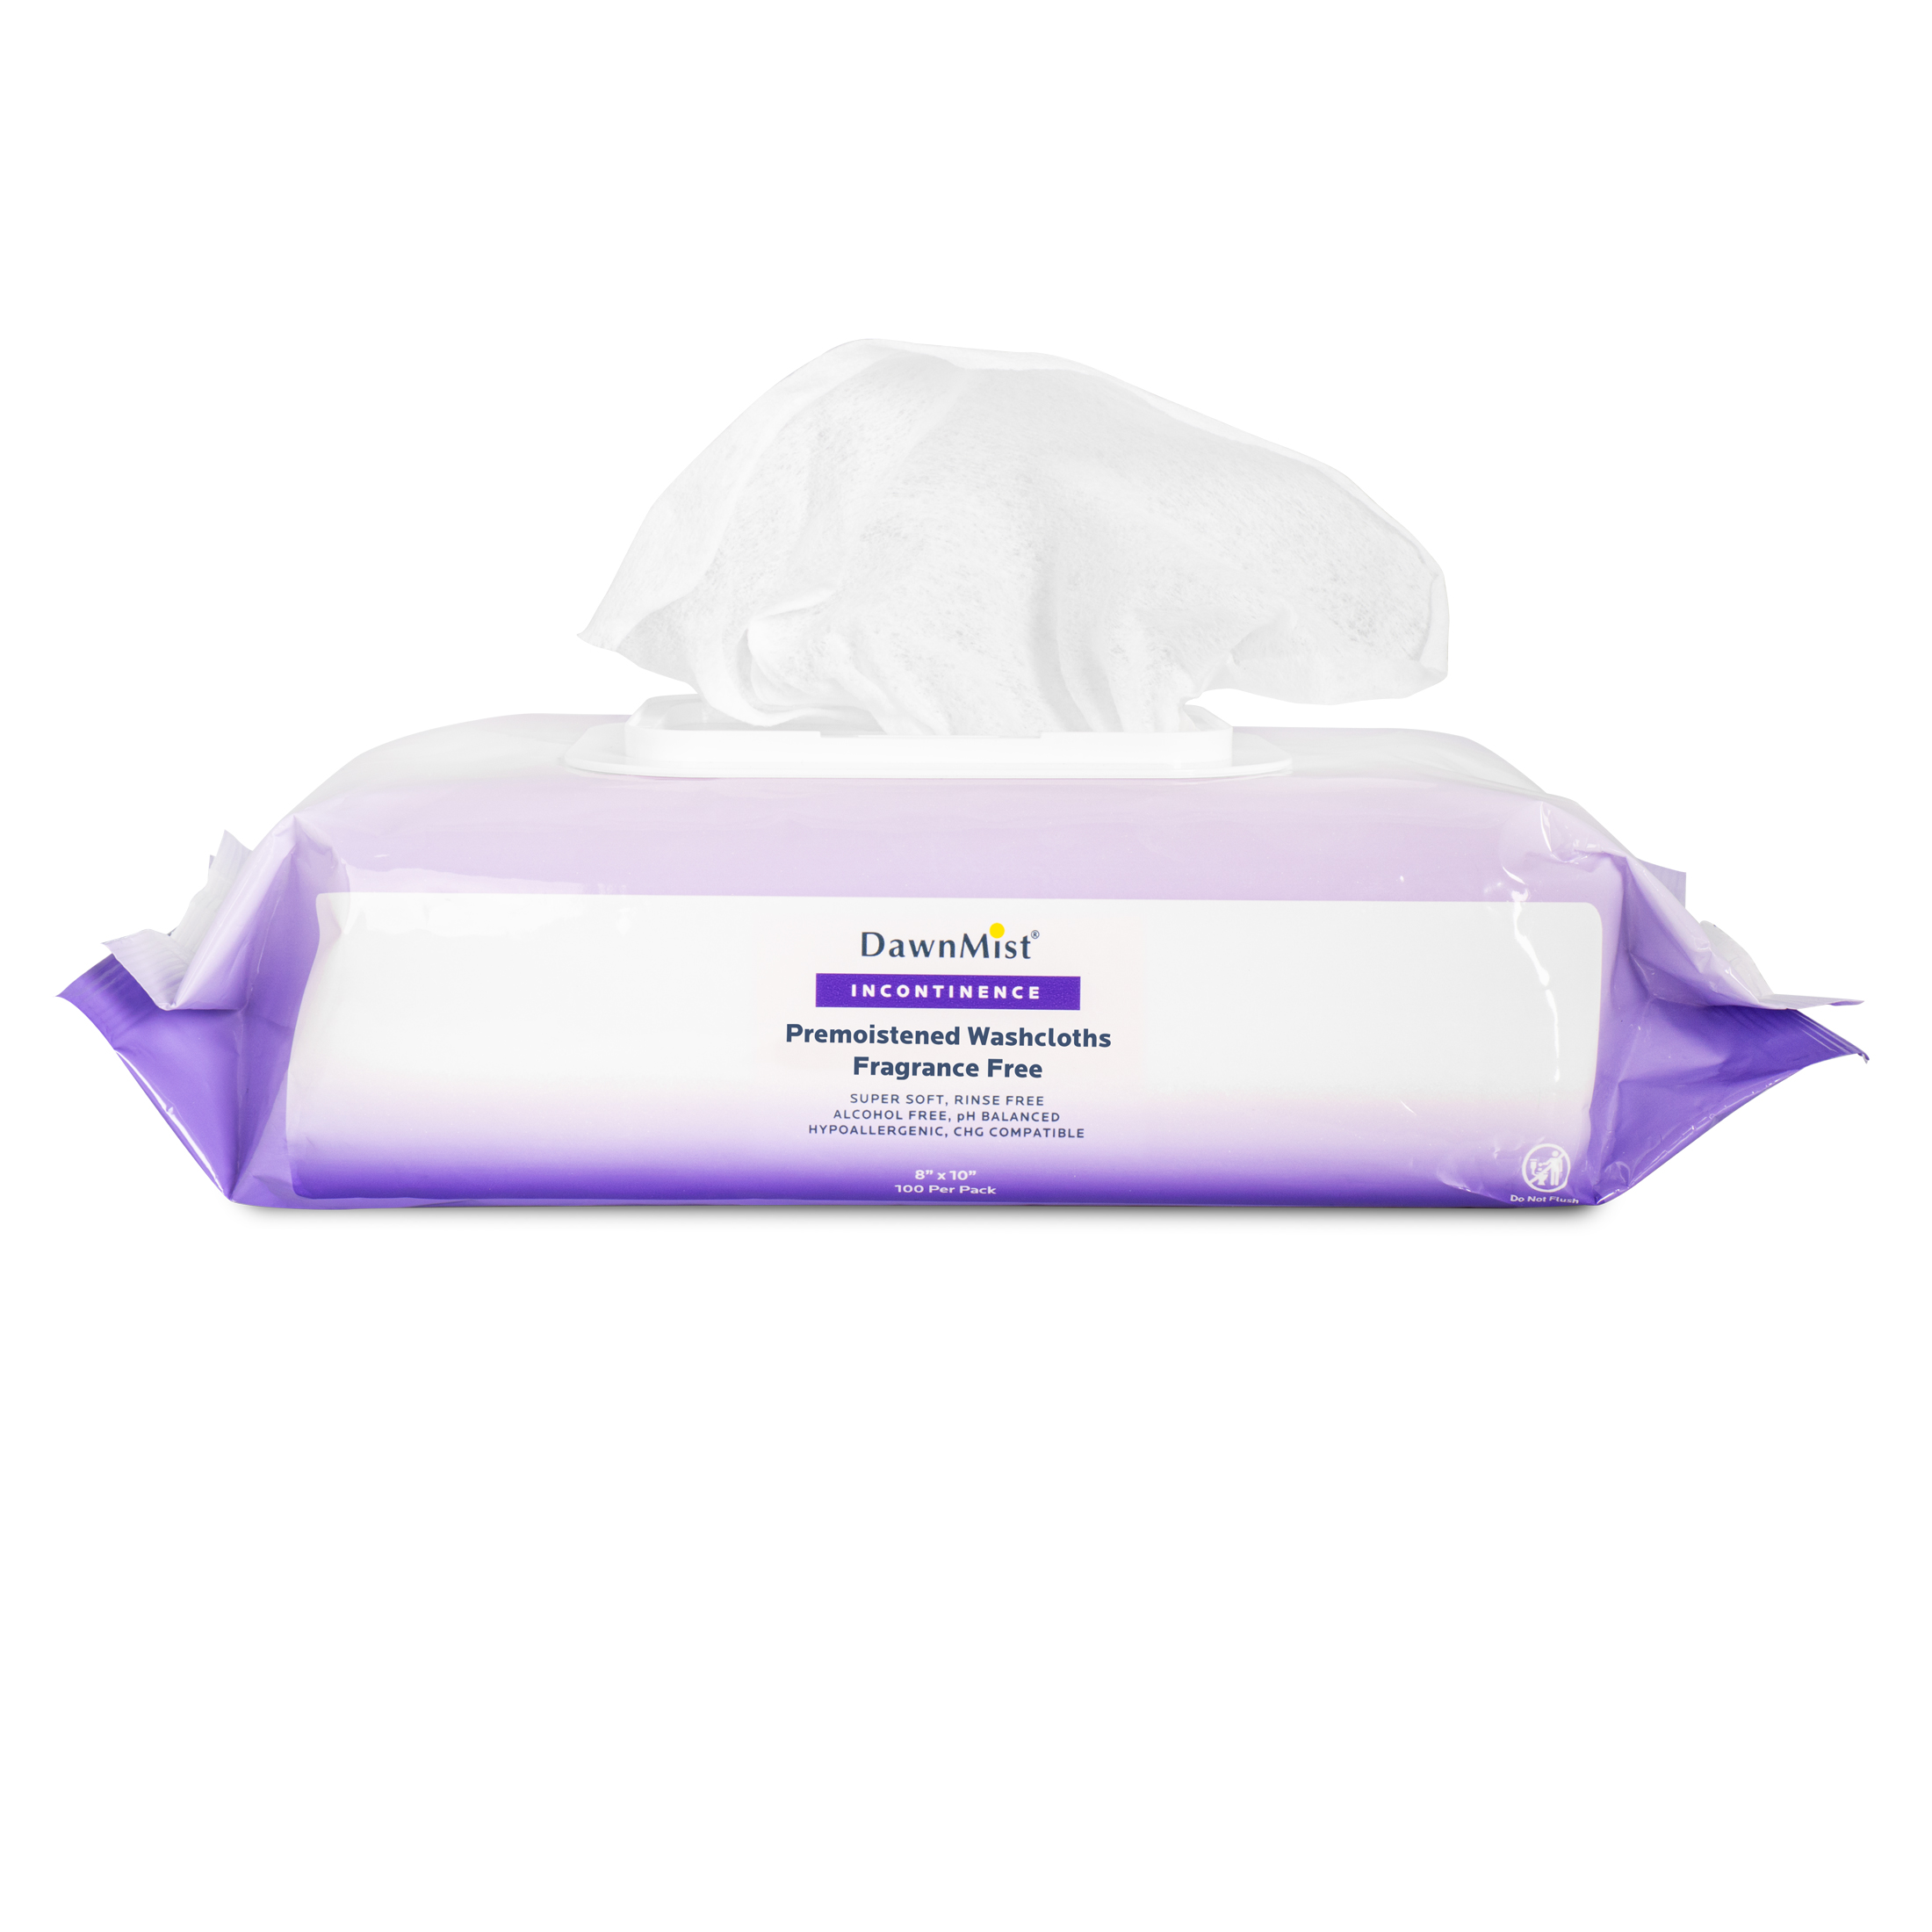 Adult Wet Wipes & Washclothes Products, Supplies and Equipment